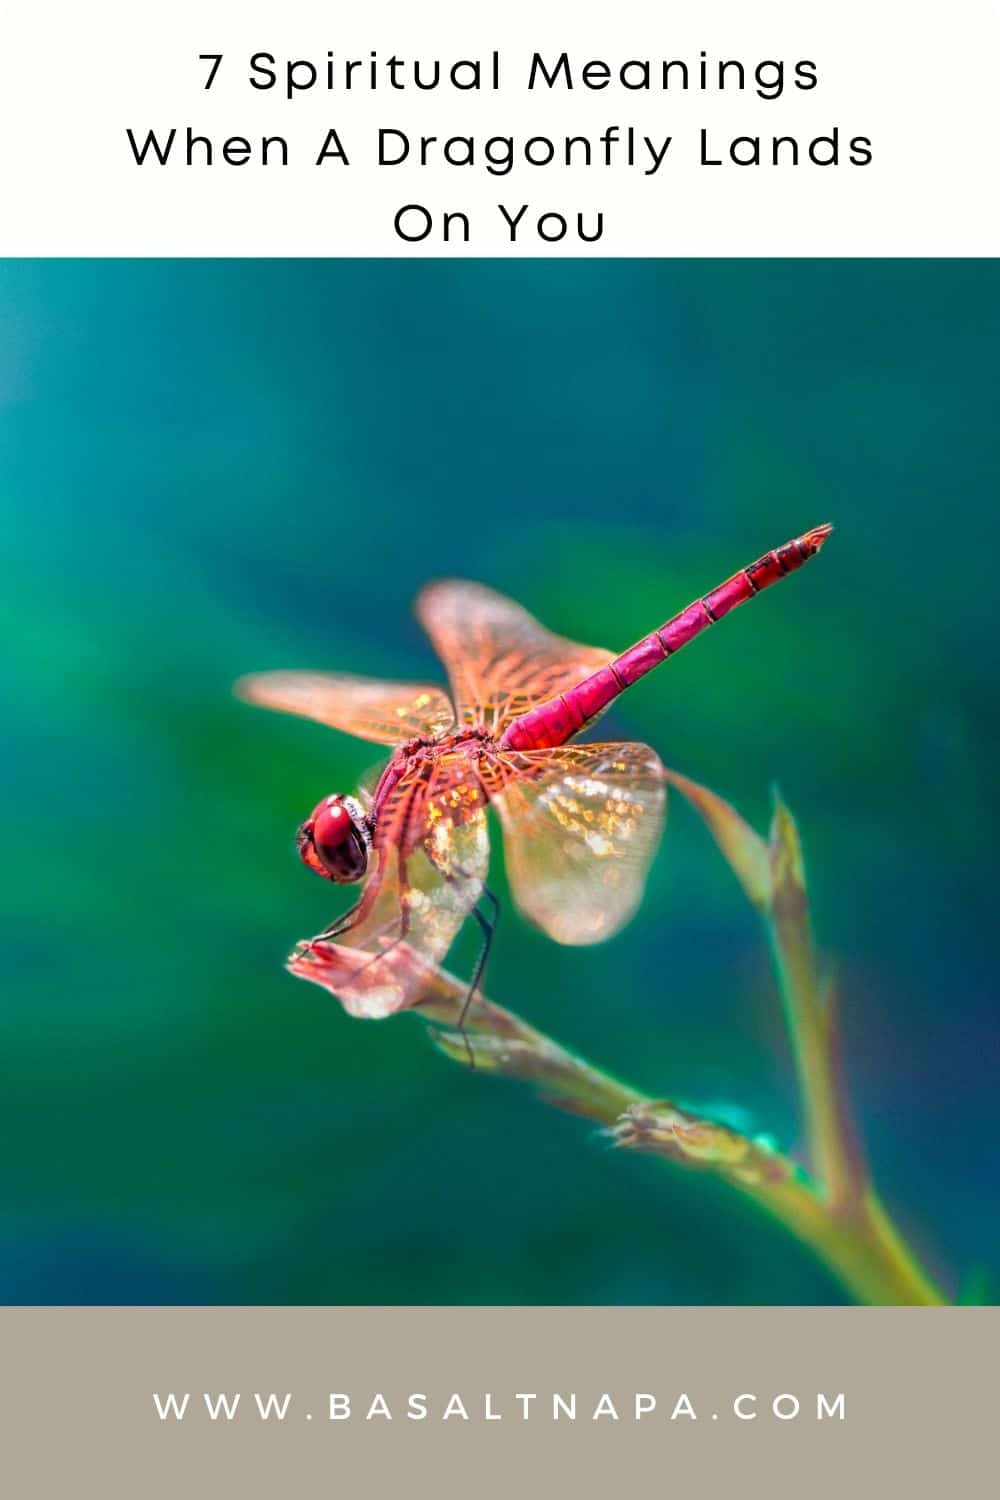  7 Spiritual Meanings When A Dragonfly Lands On You